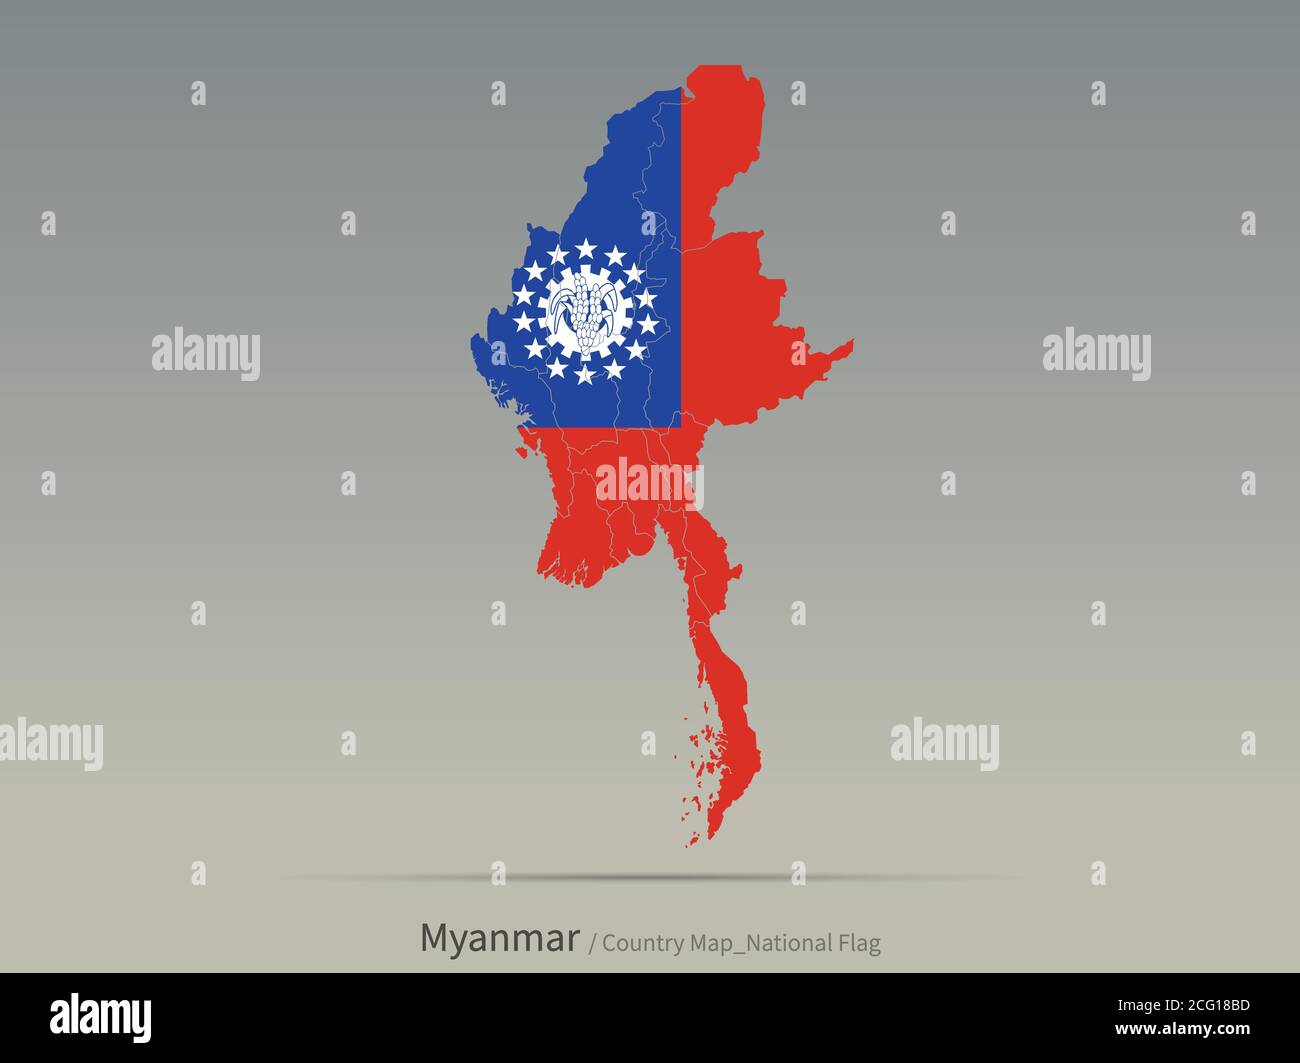 Myanmar Flag Isolated on Map. Asian countries map and flag. Stock Vector